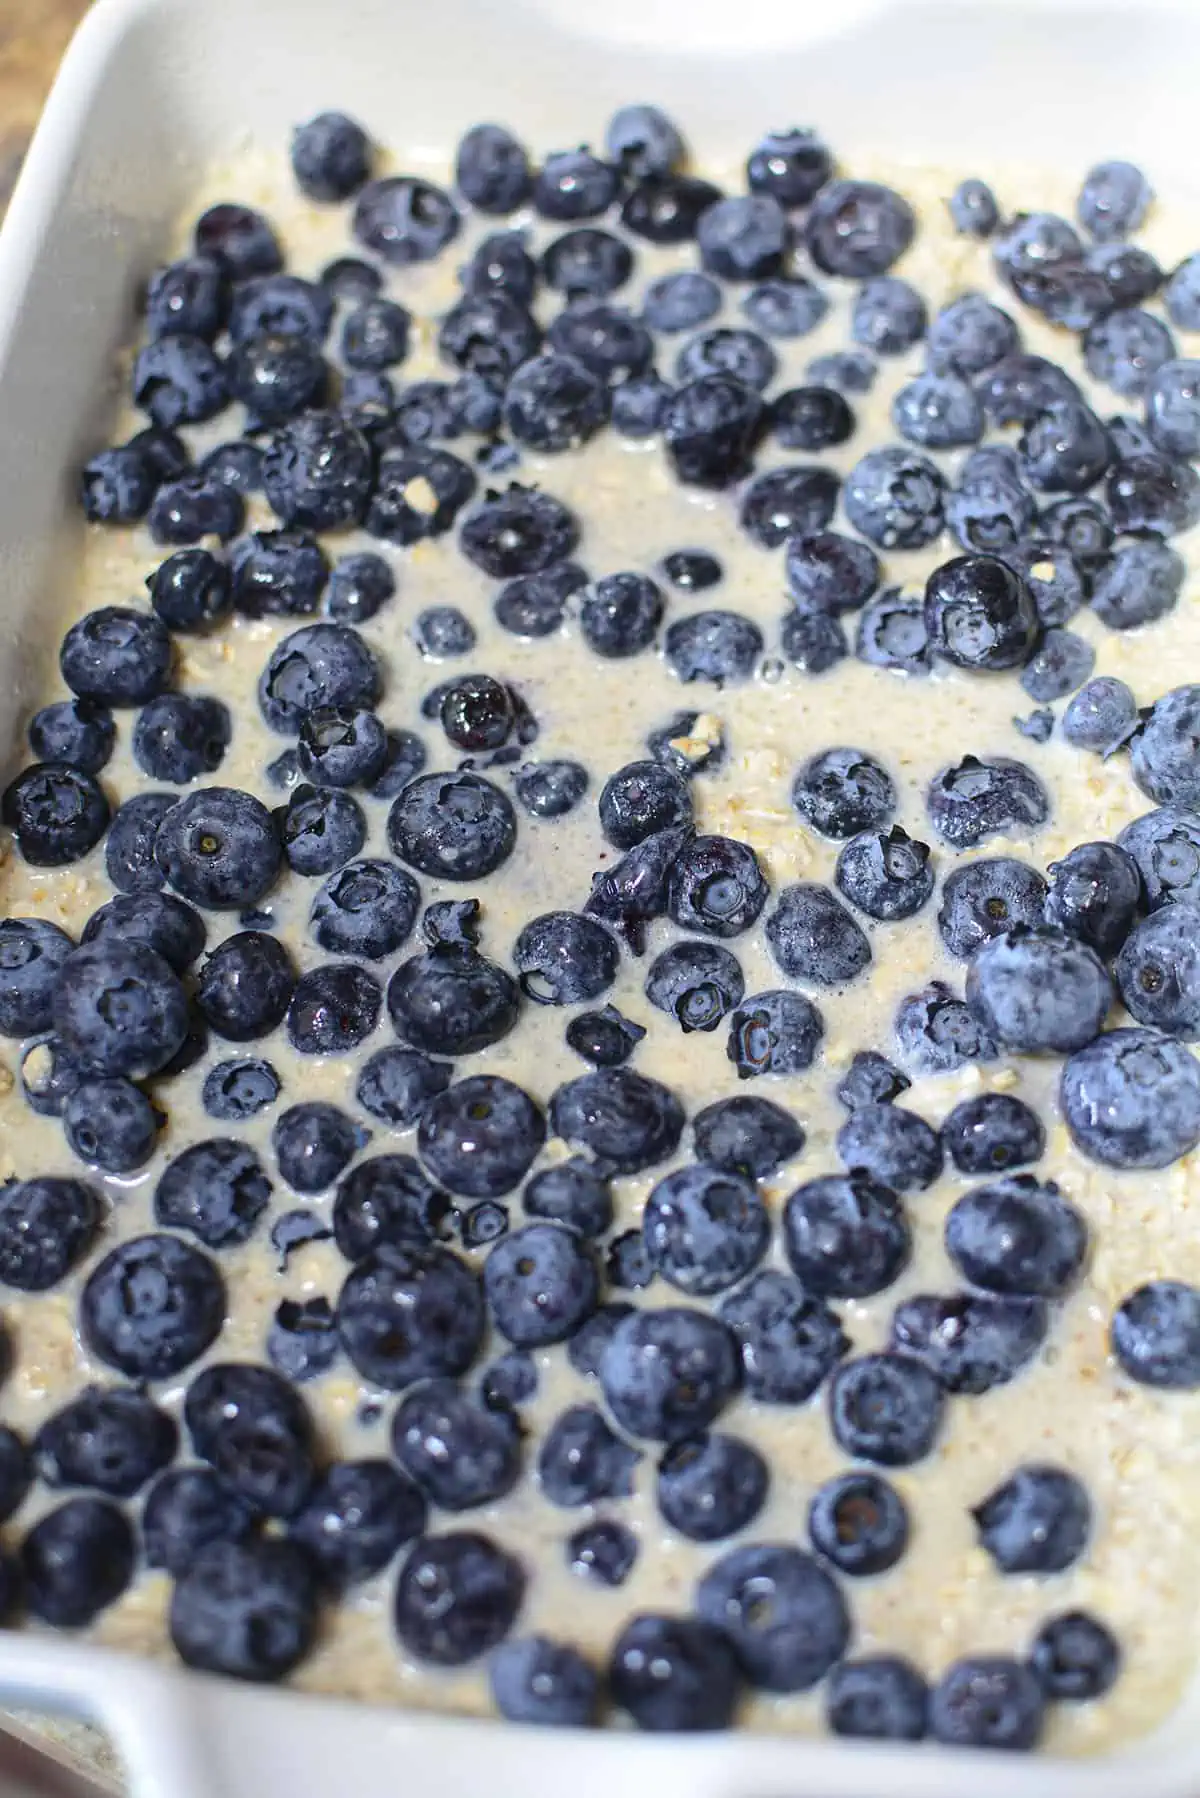 Blueberries on top of the first half of the oat batter.